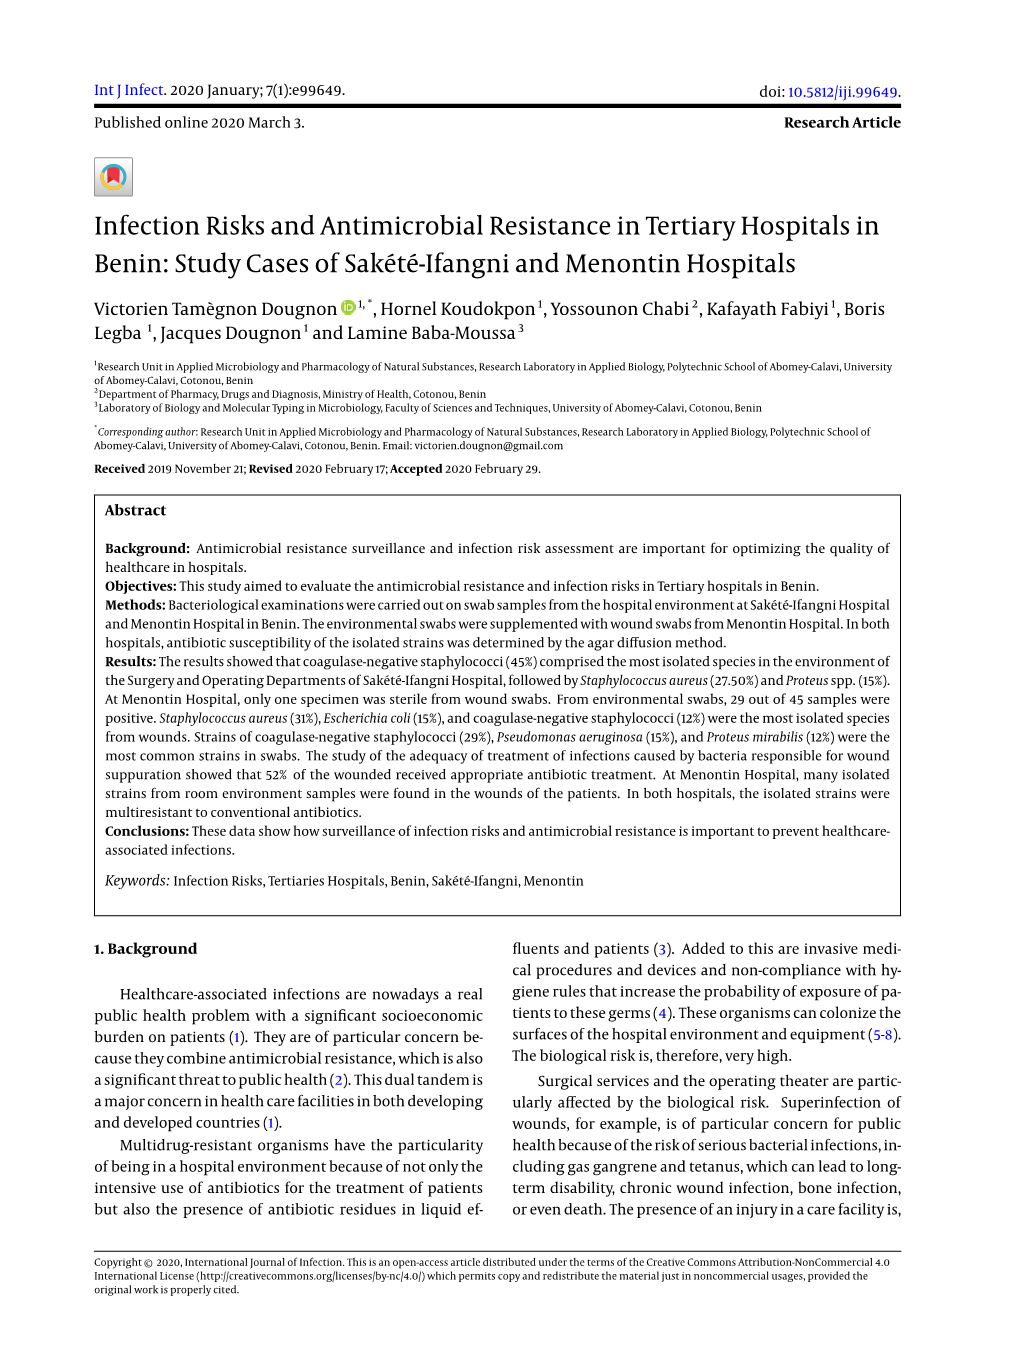 Infection Risks and Antimicrobial Resistance in Tertiary Hospitals in Benin: Study Cases of Sakété-Ifangni and Menontin Hospitals